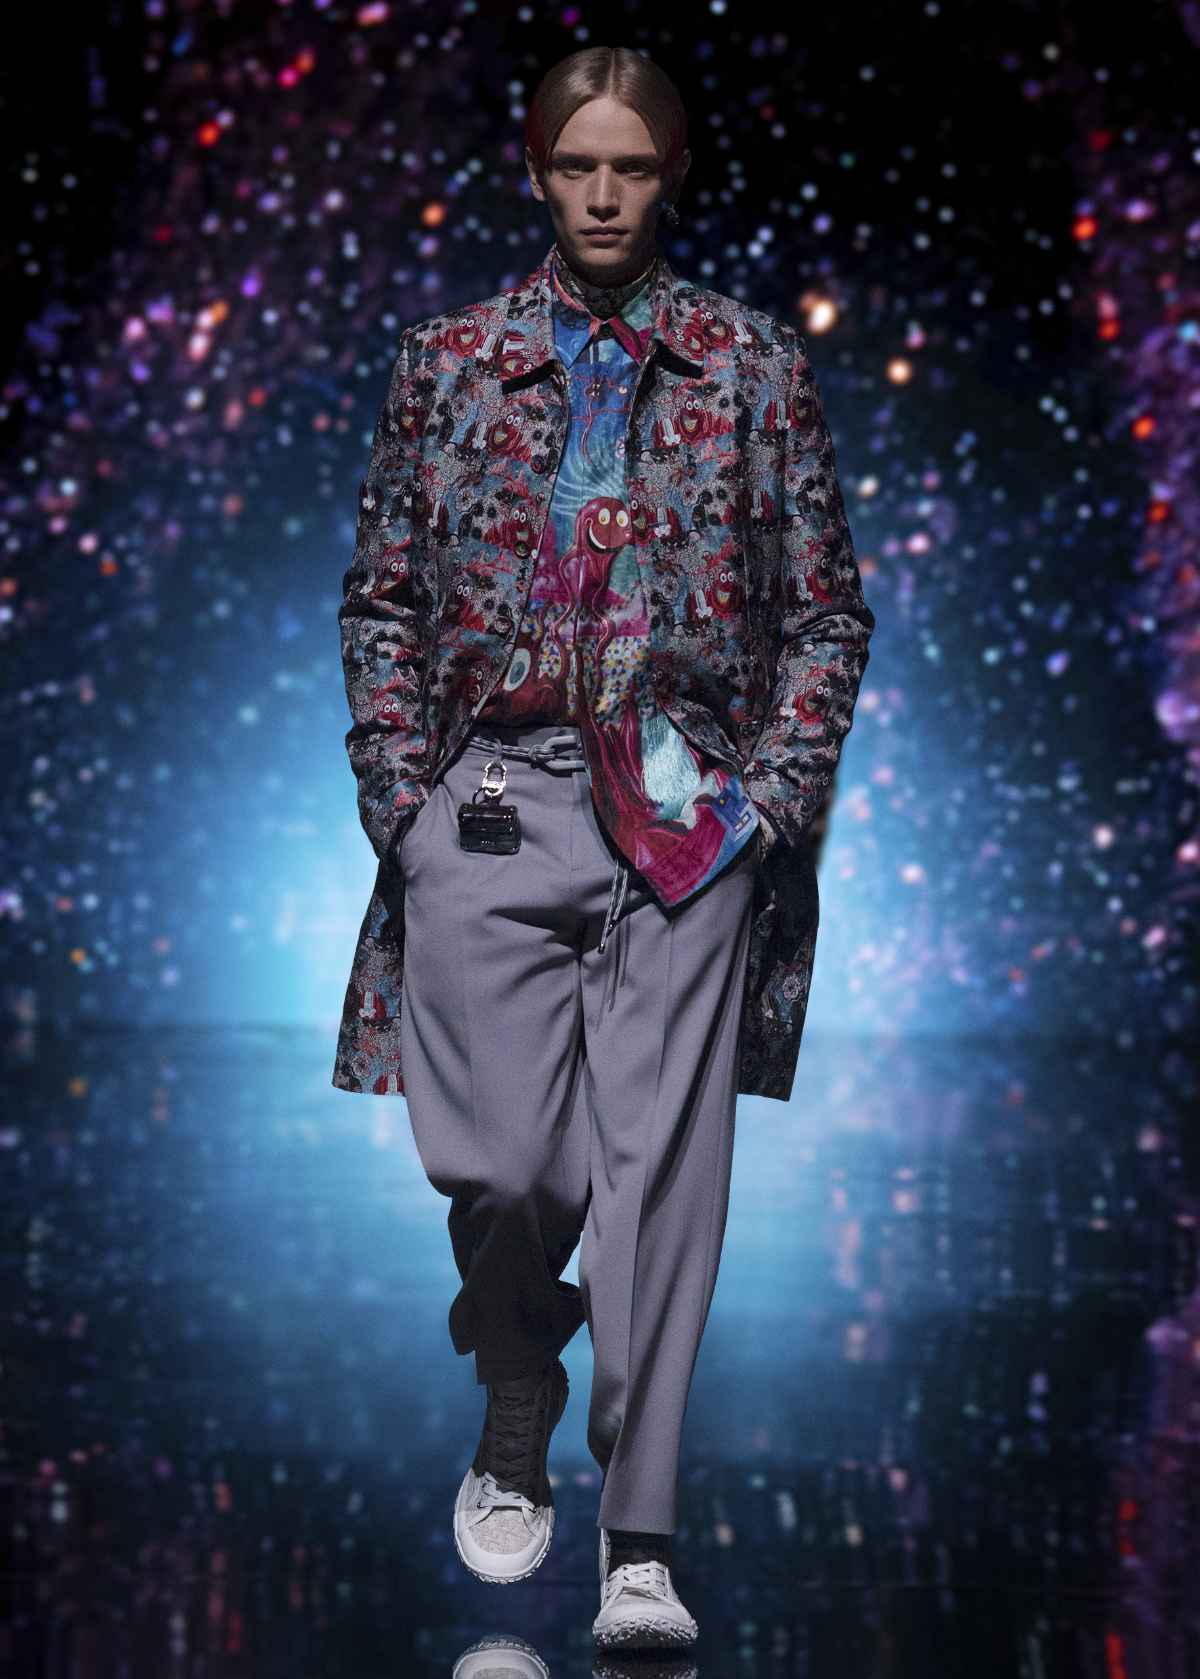 Dior Men's Fall 2021 Collection Mirrors the Evolution of the House in the 21st Century